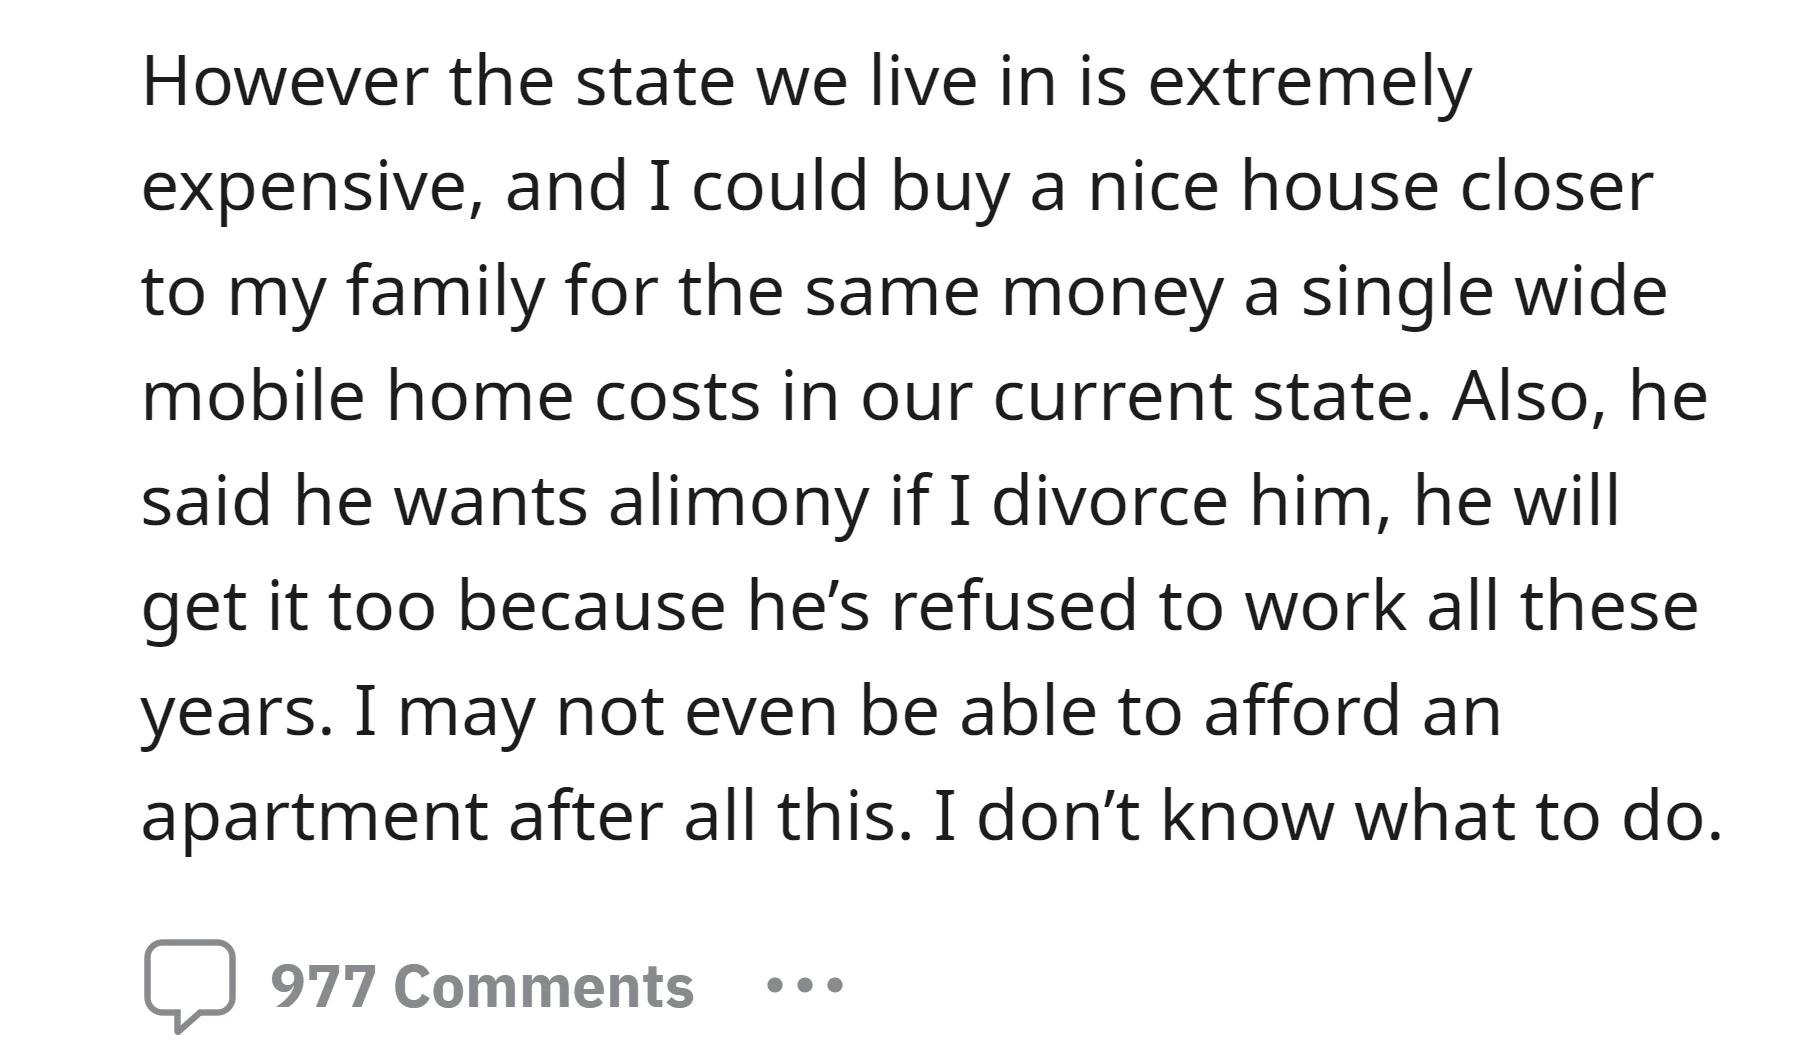 OP is uncertain about her financial future after divorce